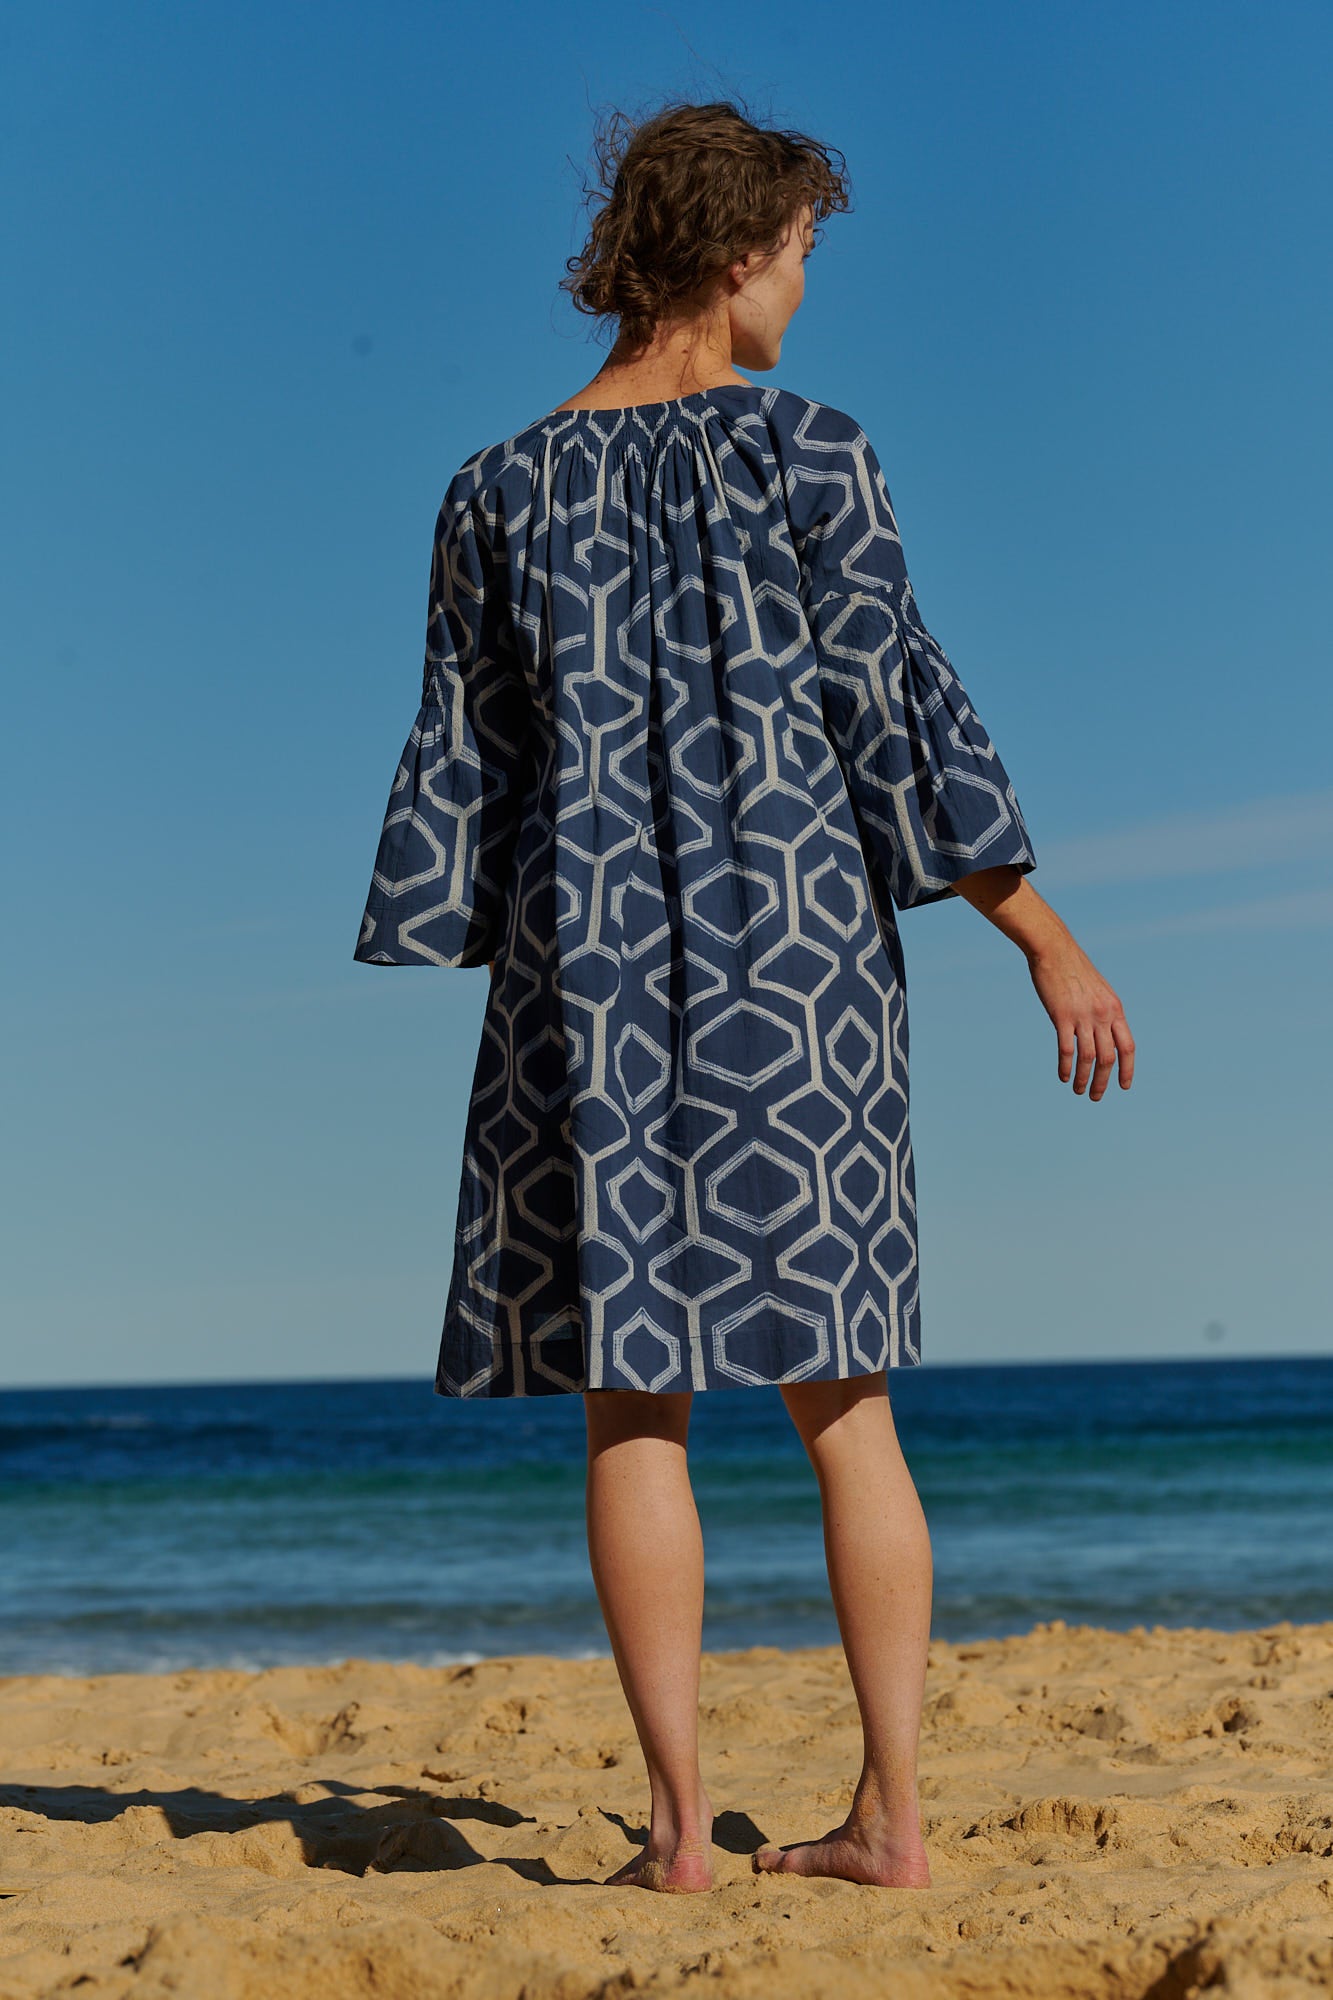 An easy fit, indigo shibori-dyed cotton dress with raglan bell sleeves and ruched detail at neckline